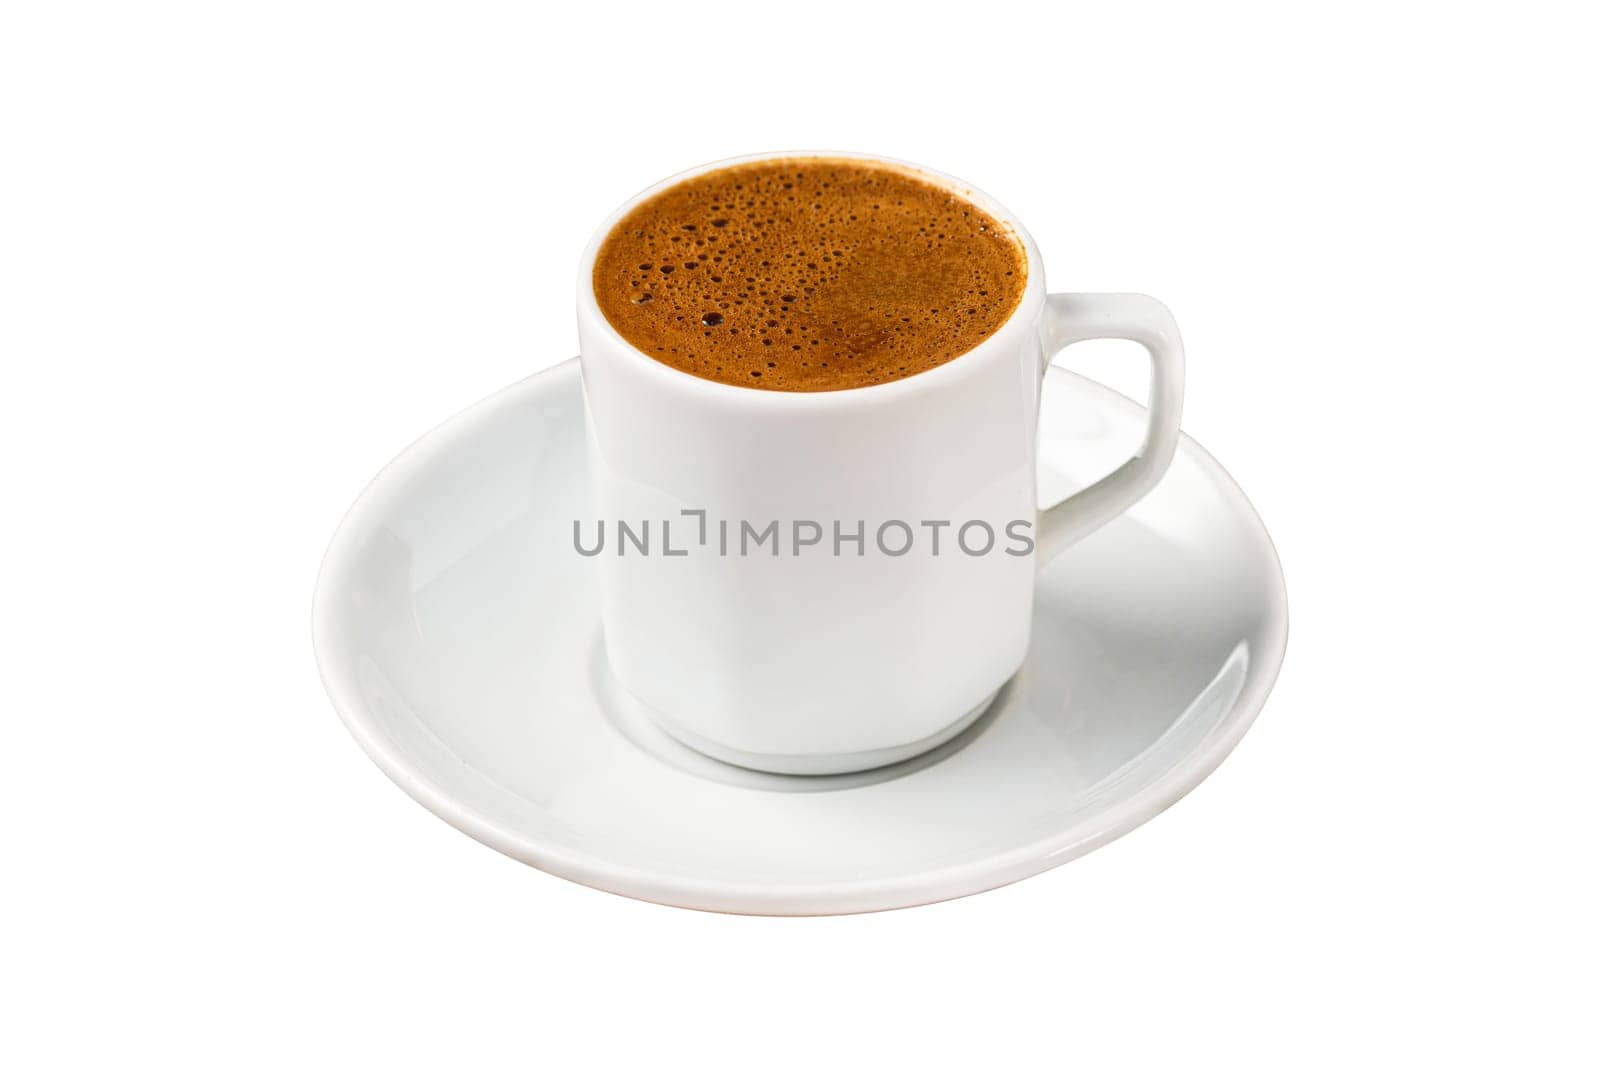 Turkish coffee in classic coffee cup on white background by Sonat